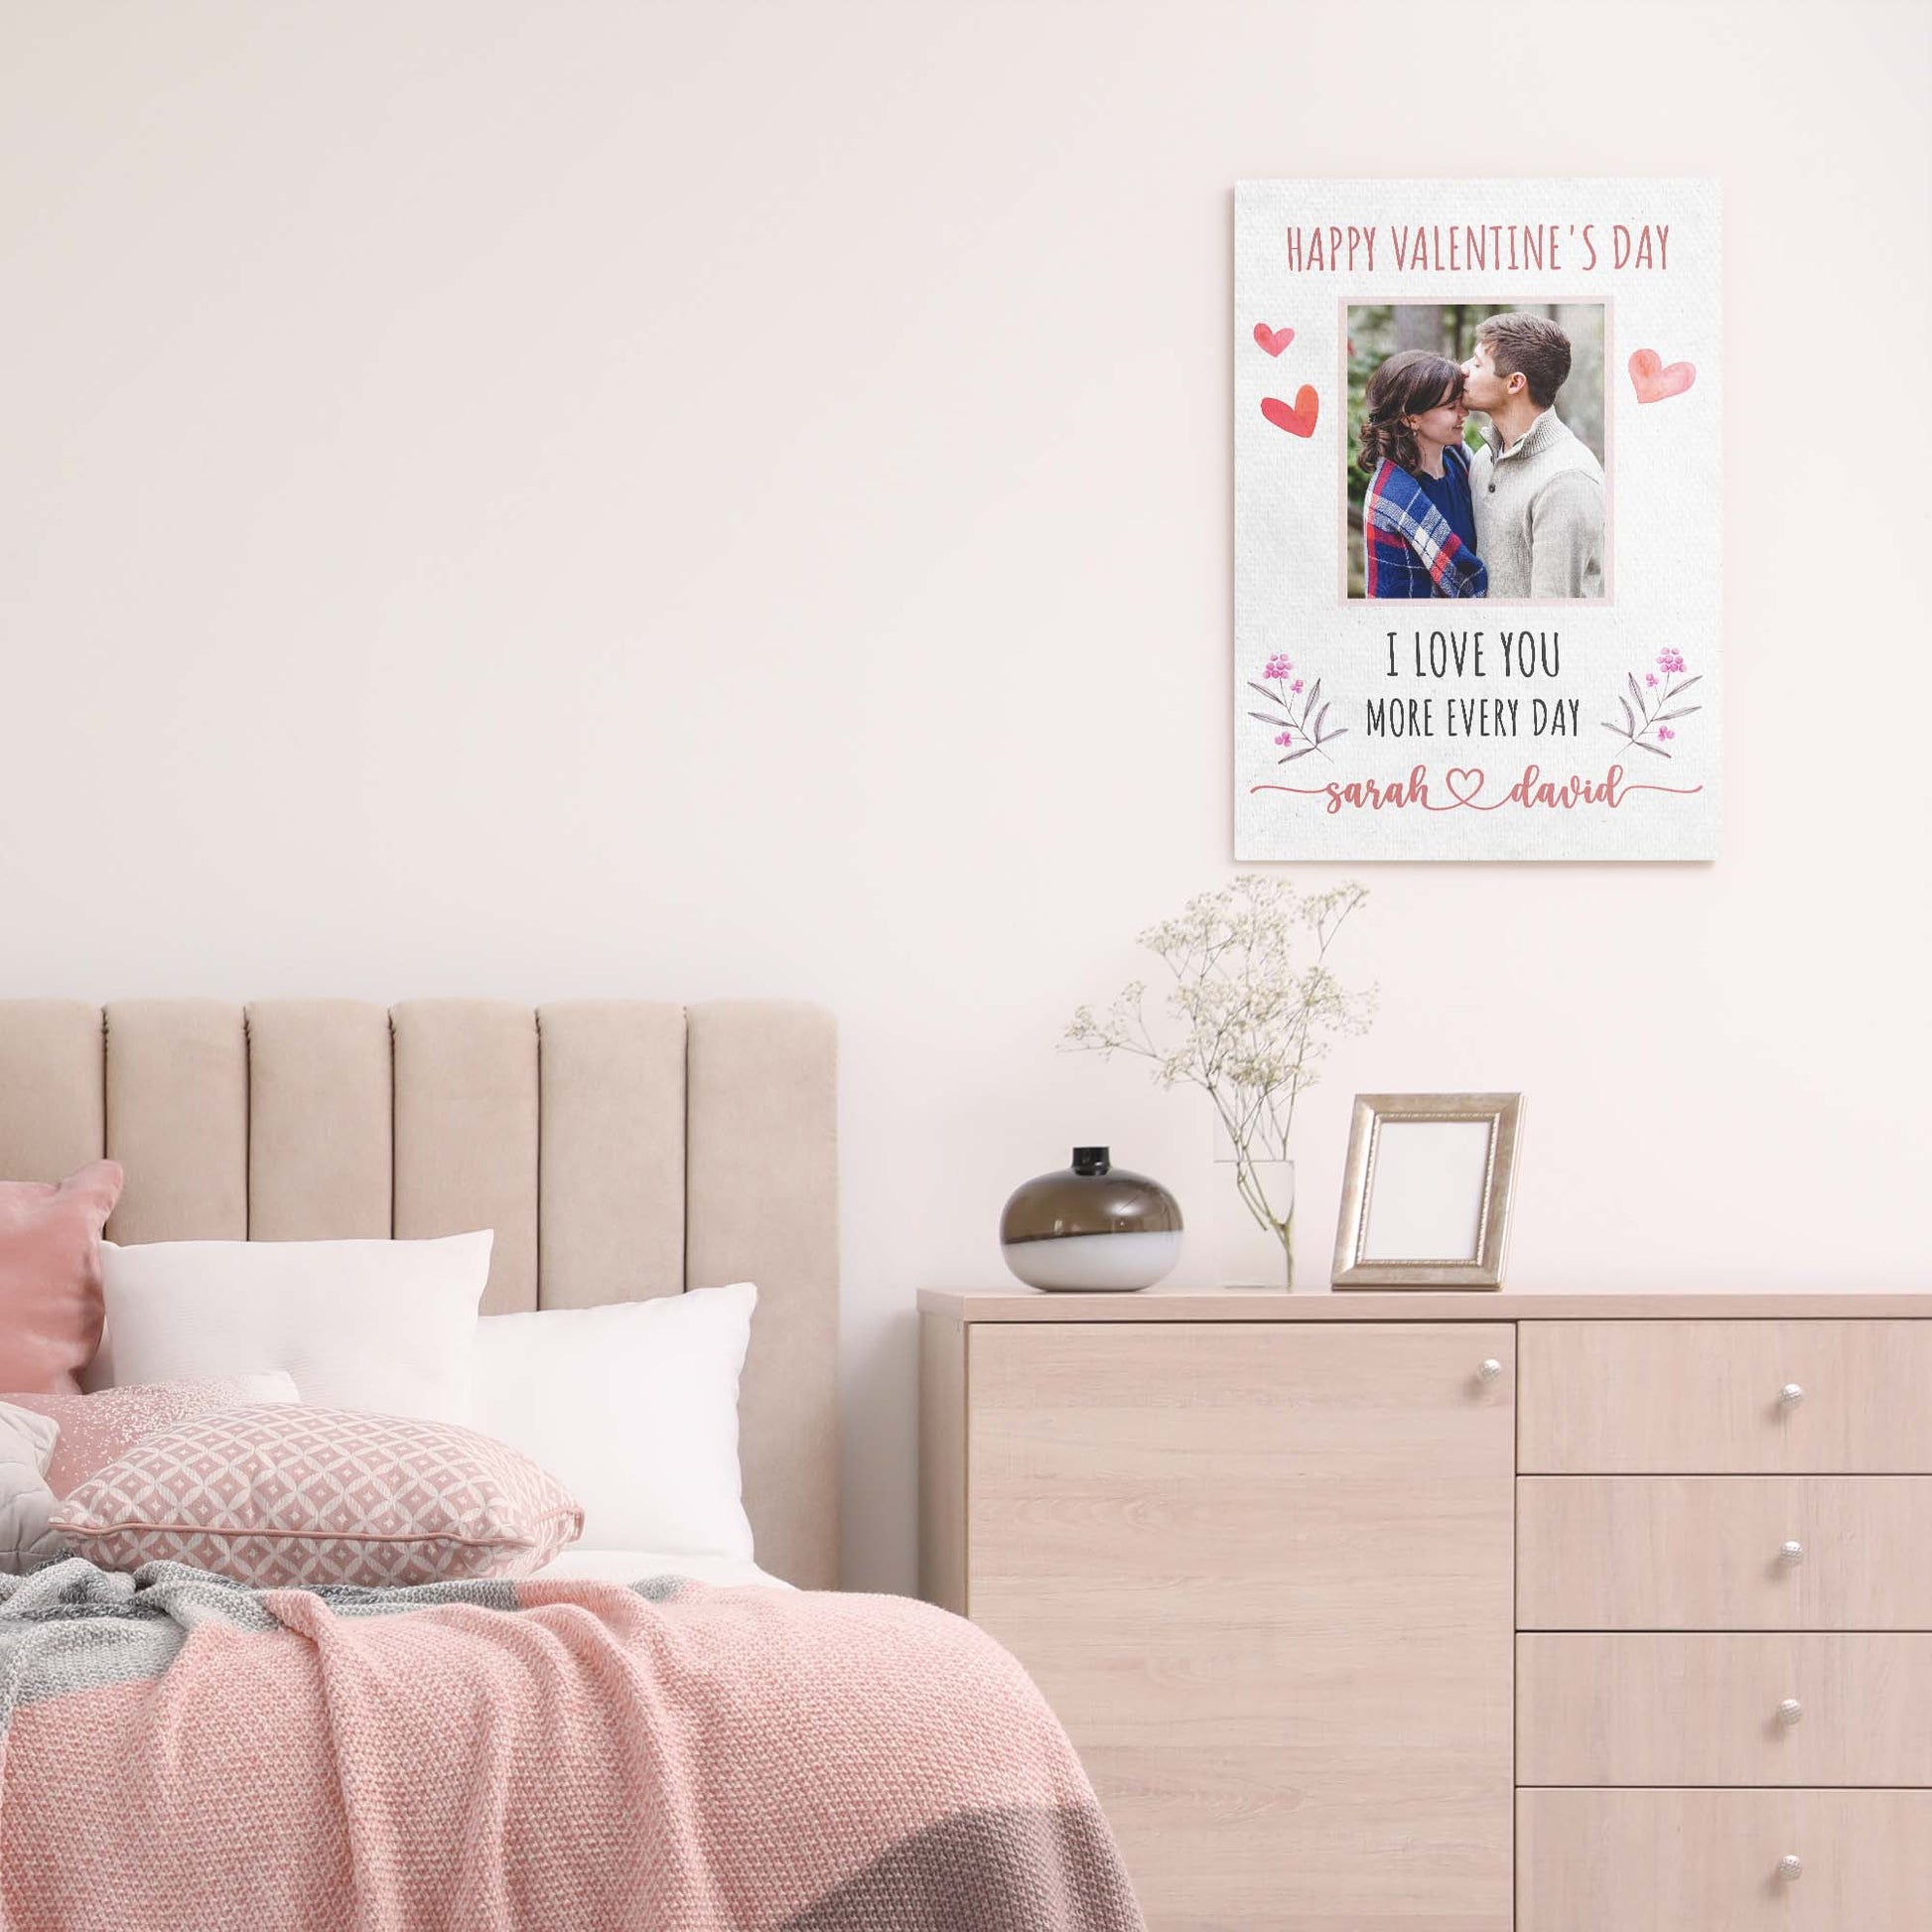 I Love You More Every Day Romantic Sign - Image by Tailored Canvases